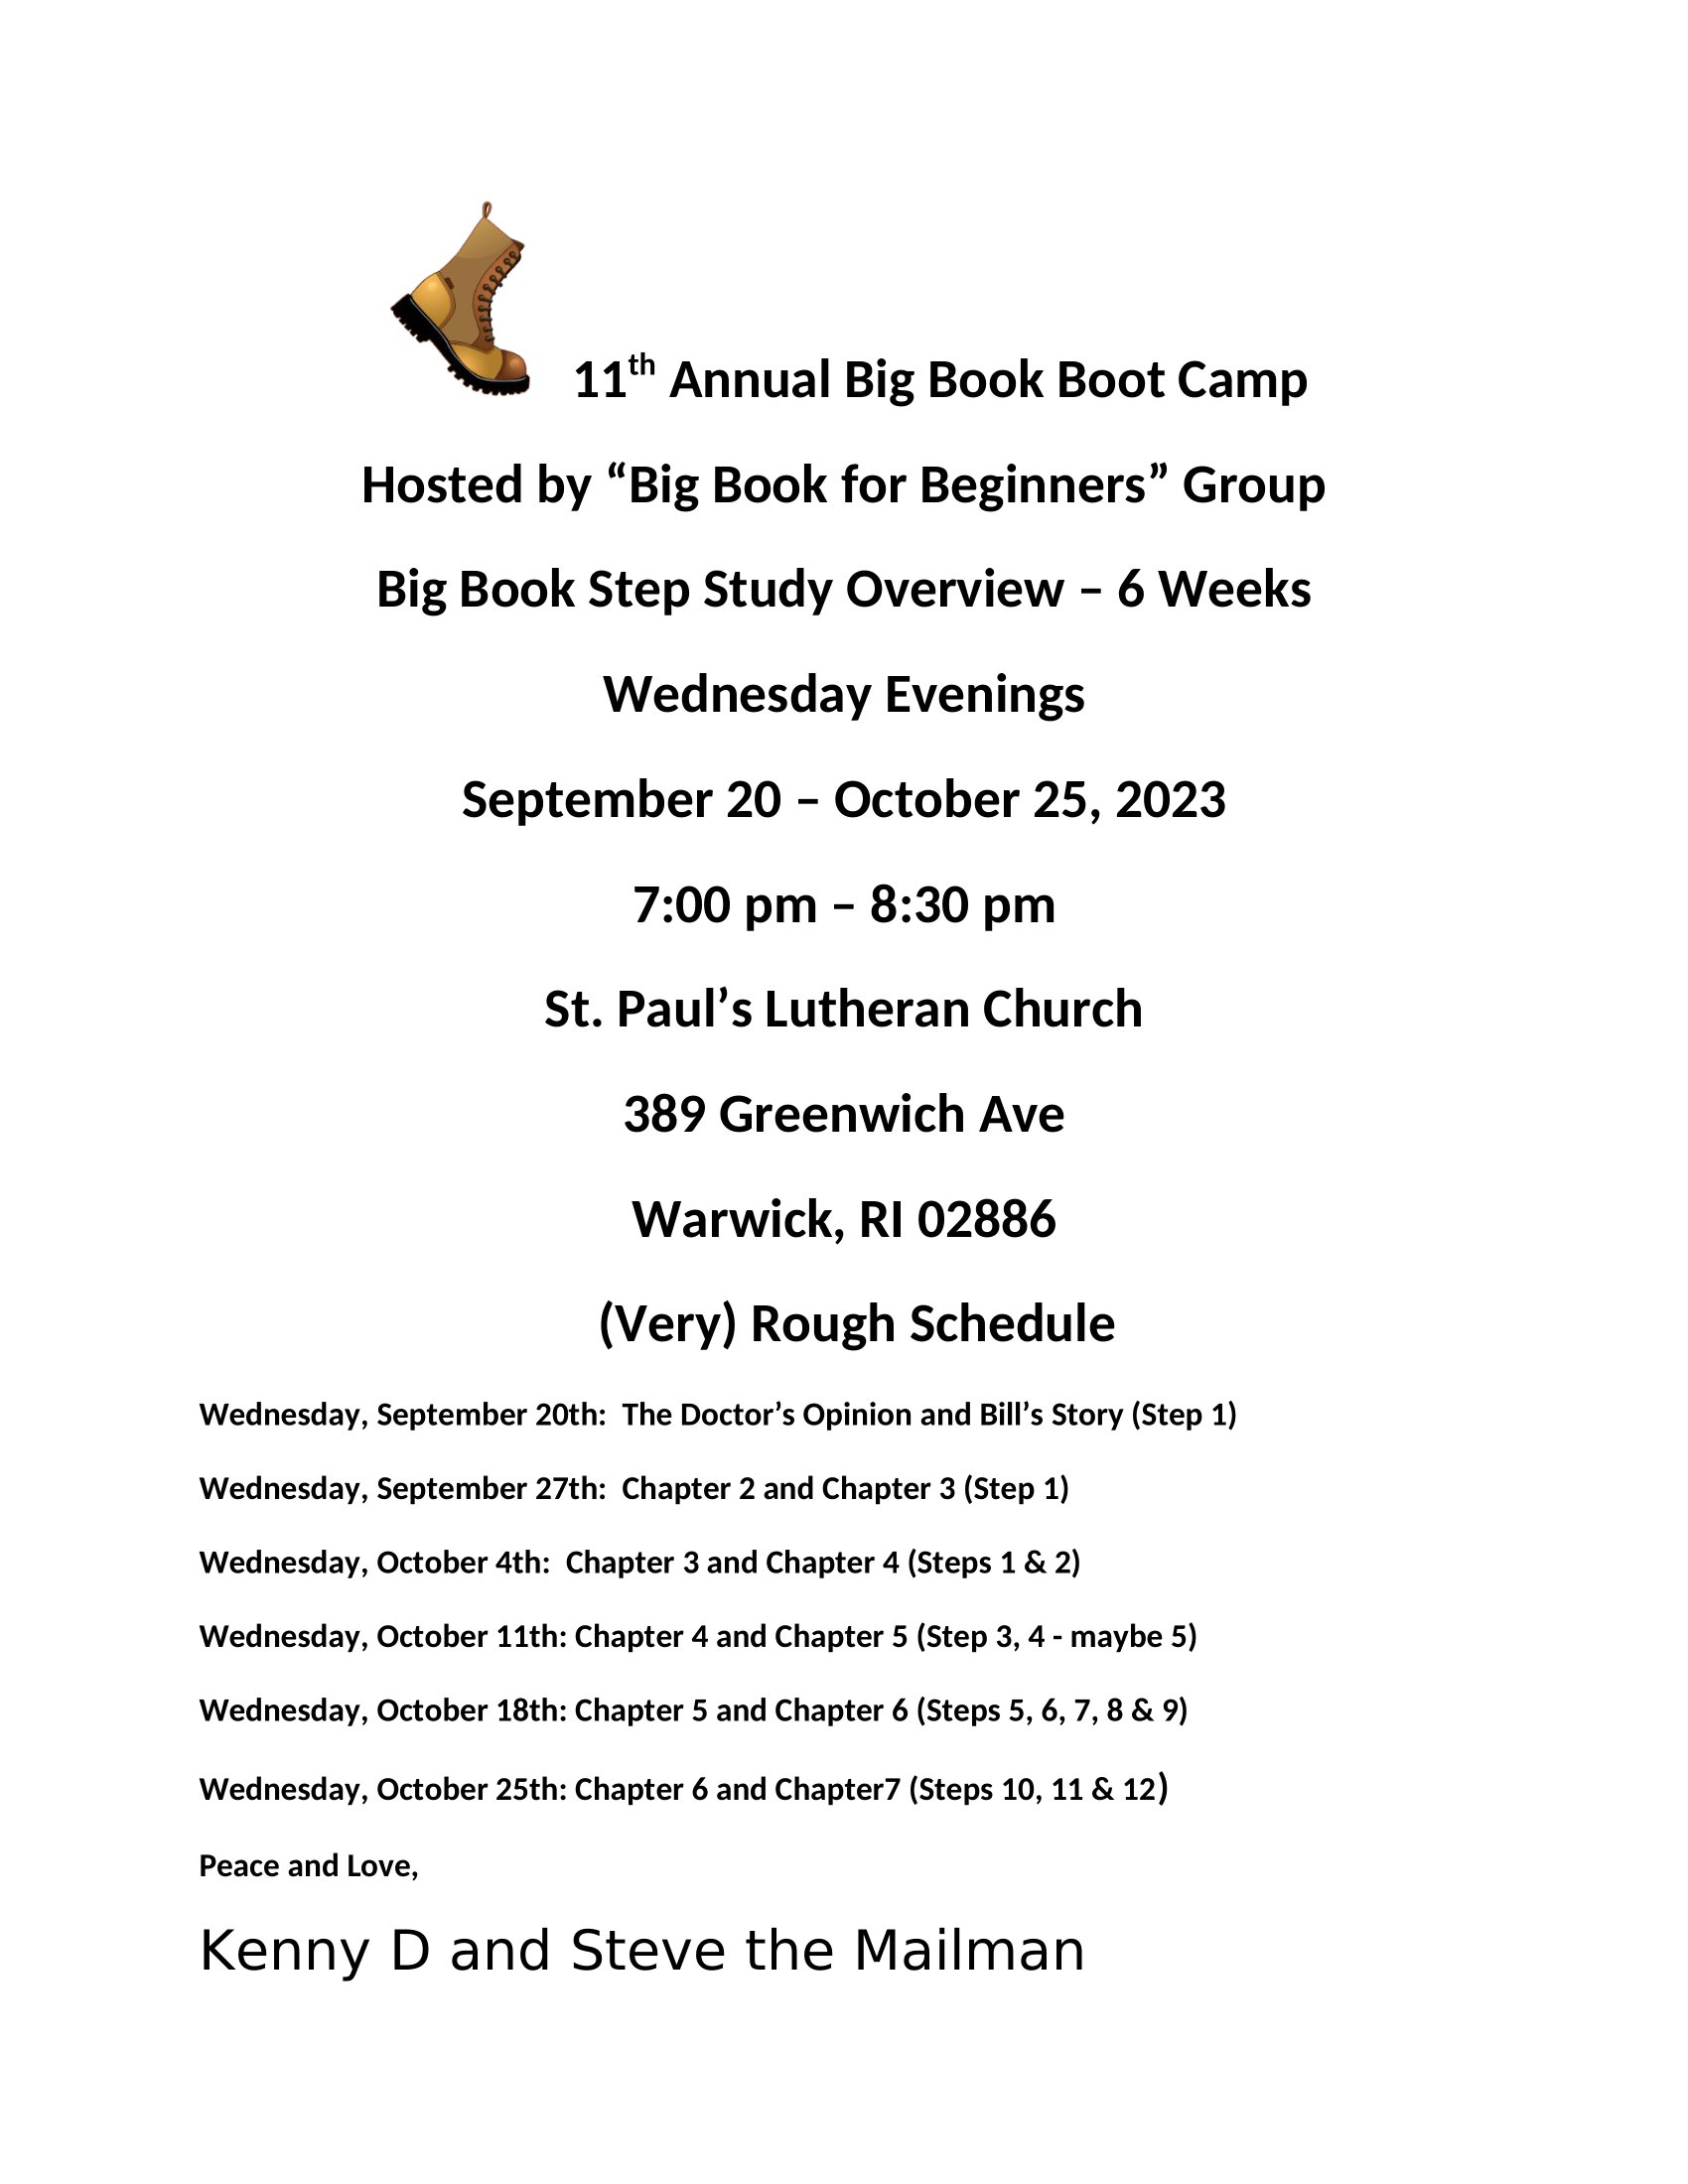 11th-annual-big-book-boot-camp-hosted-by-big-book-for-beginners-group